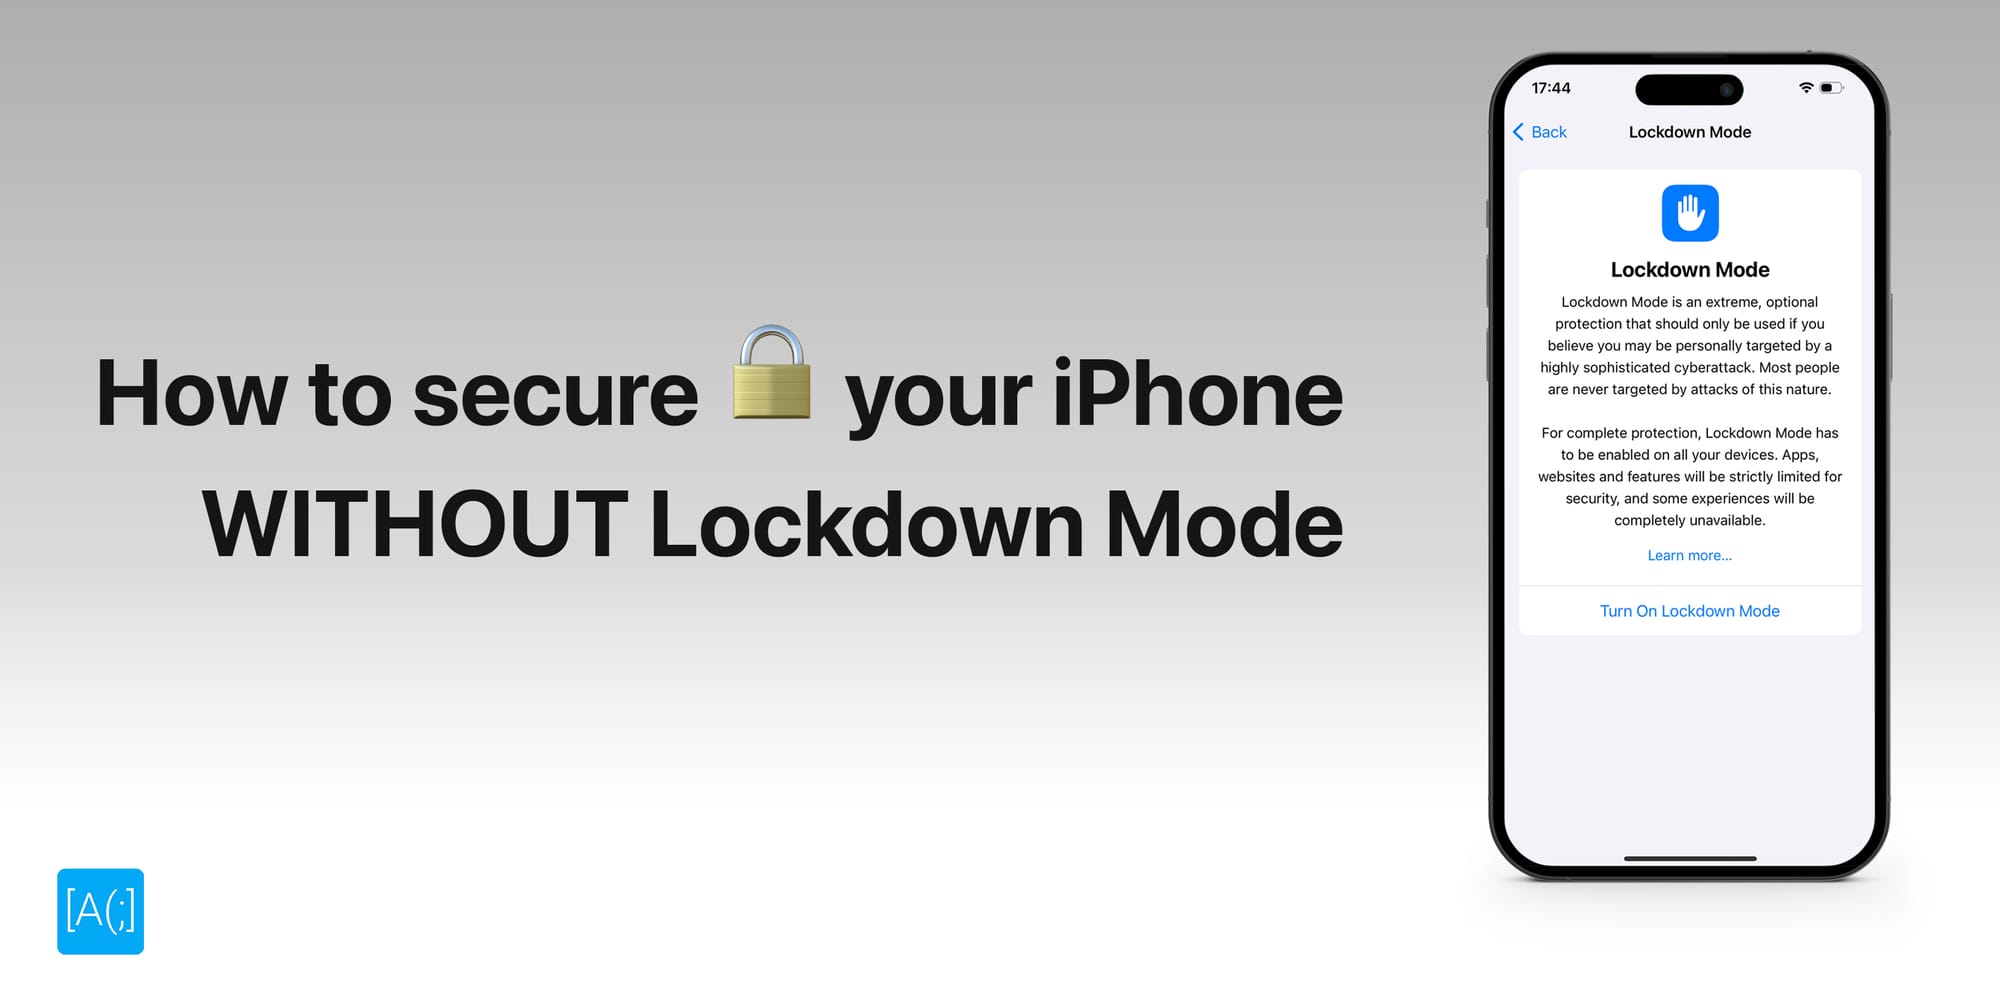 How to secure your iPhone WITHOUT Lockdown Mode